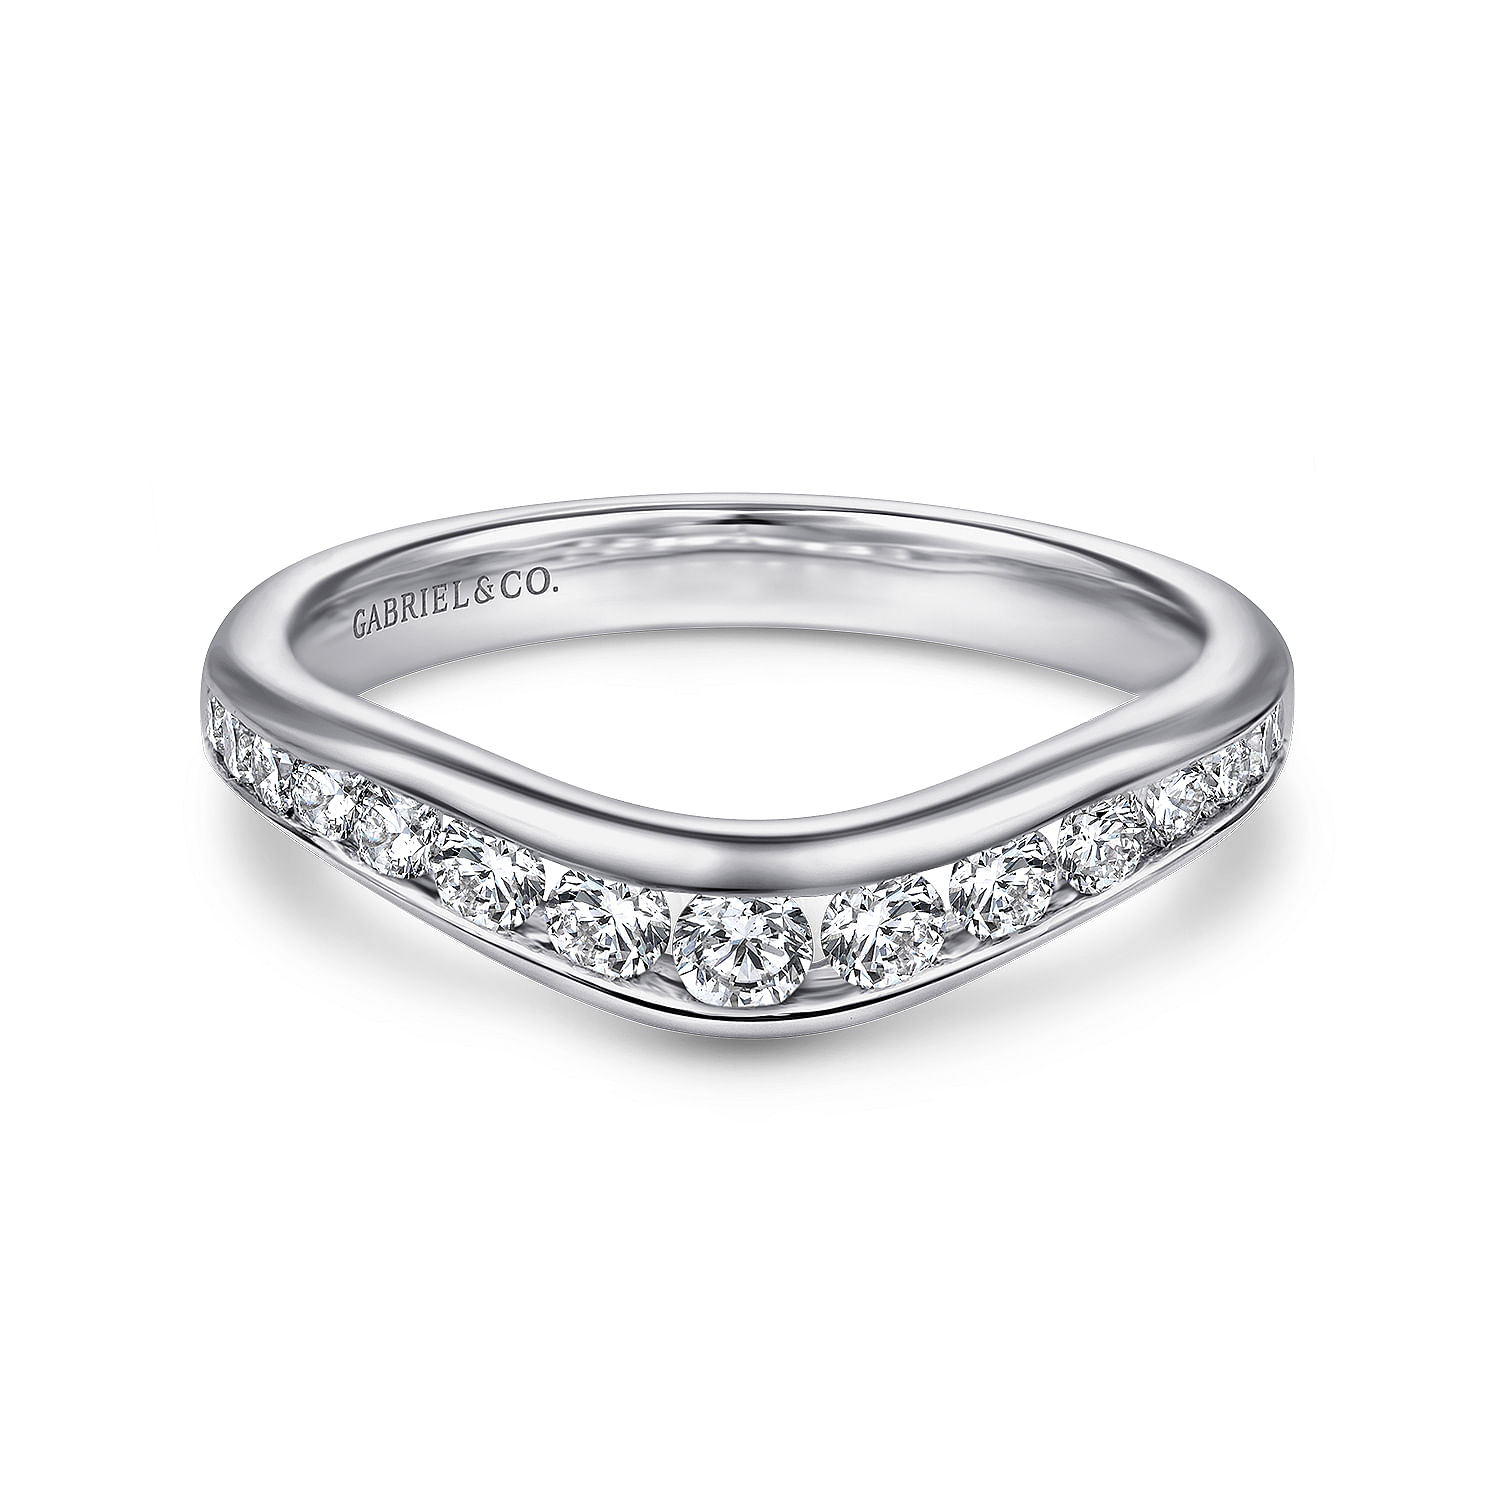 Deux - Curved 14K White Gold Channel Set Diamond Wedding Band